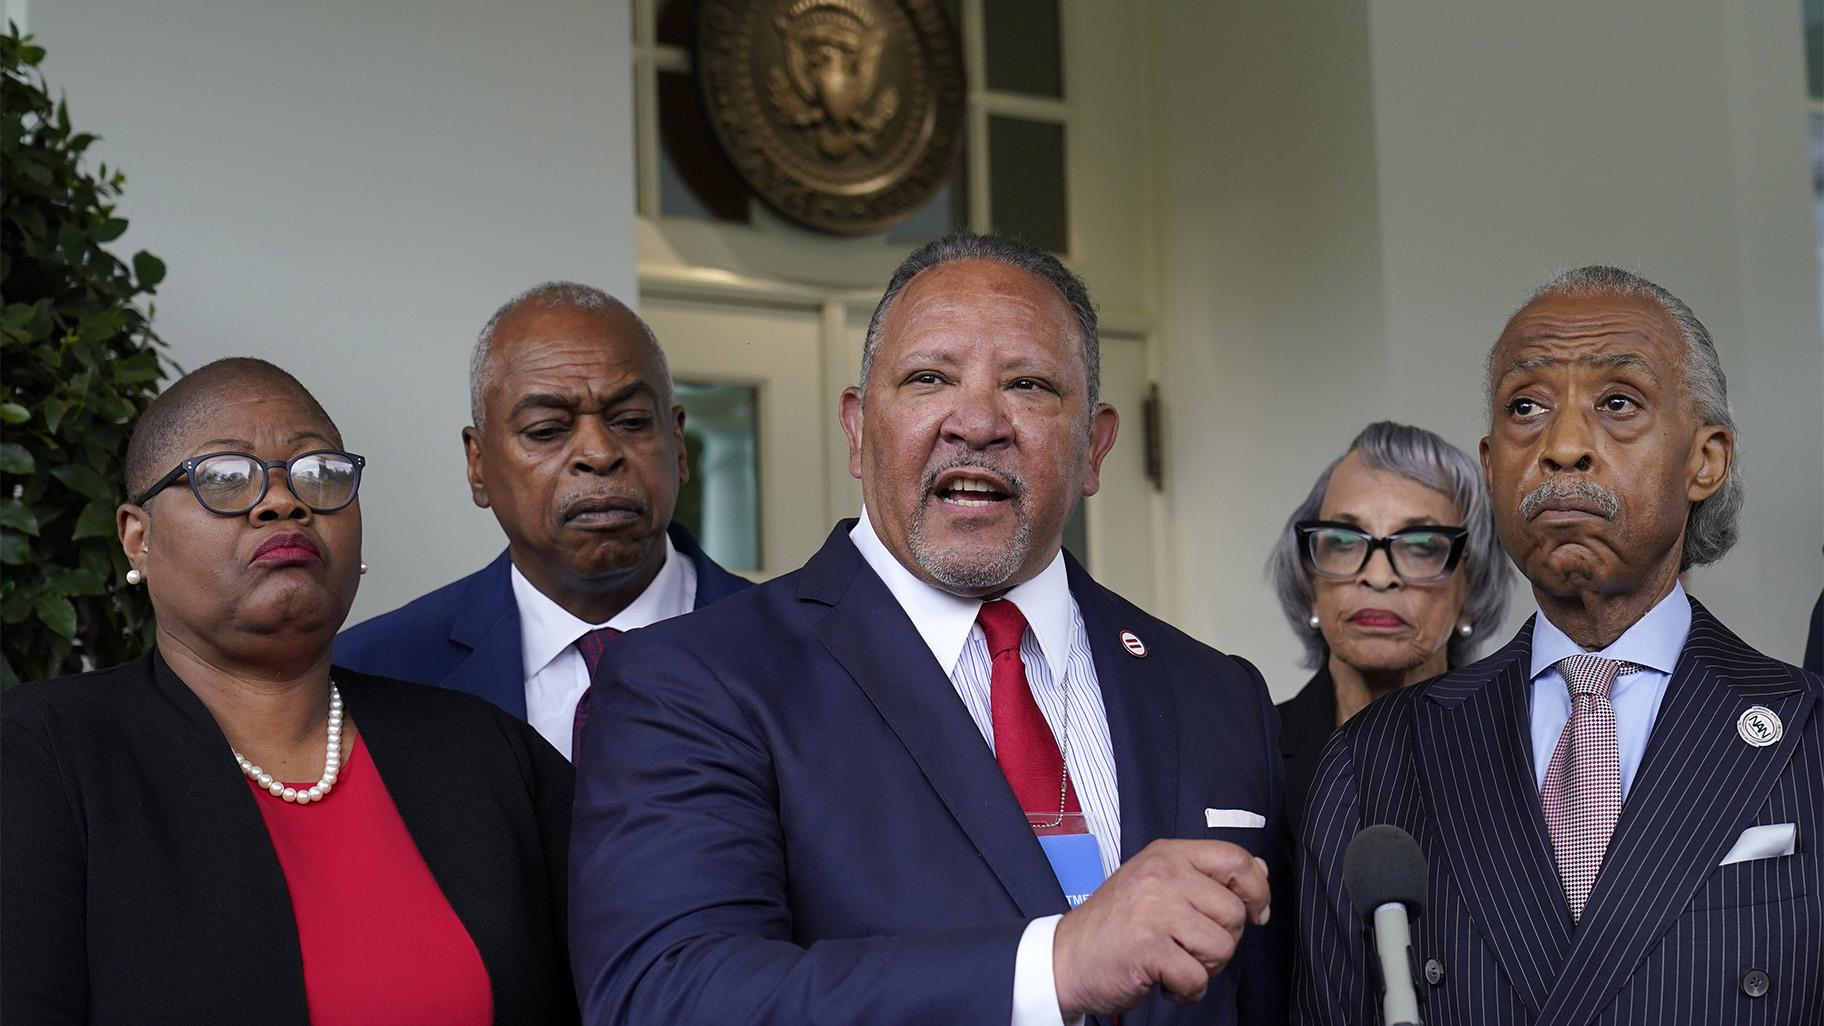 Marc Morial, center, President and Chief Executive Officer of the National Urban League, talks with reporters outside the West Wing of the White House in Washington, Thursday, July 8, 2021, following a meeting with President Joe Biden and leadership of top civil rights organizations. (AP Photo / Susan Walsh)